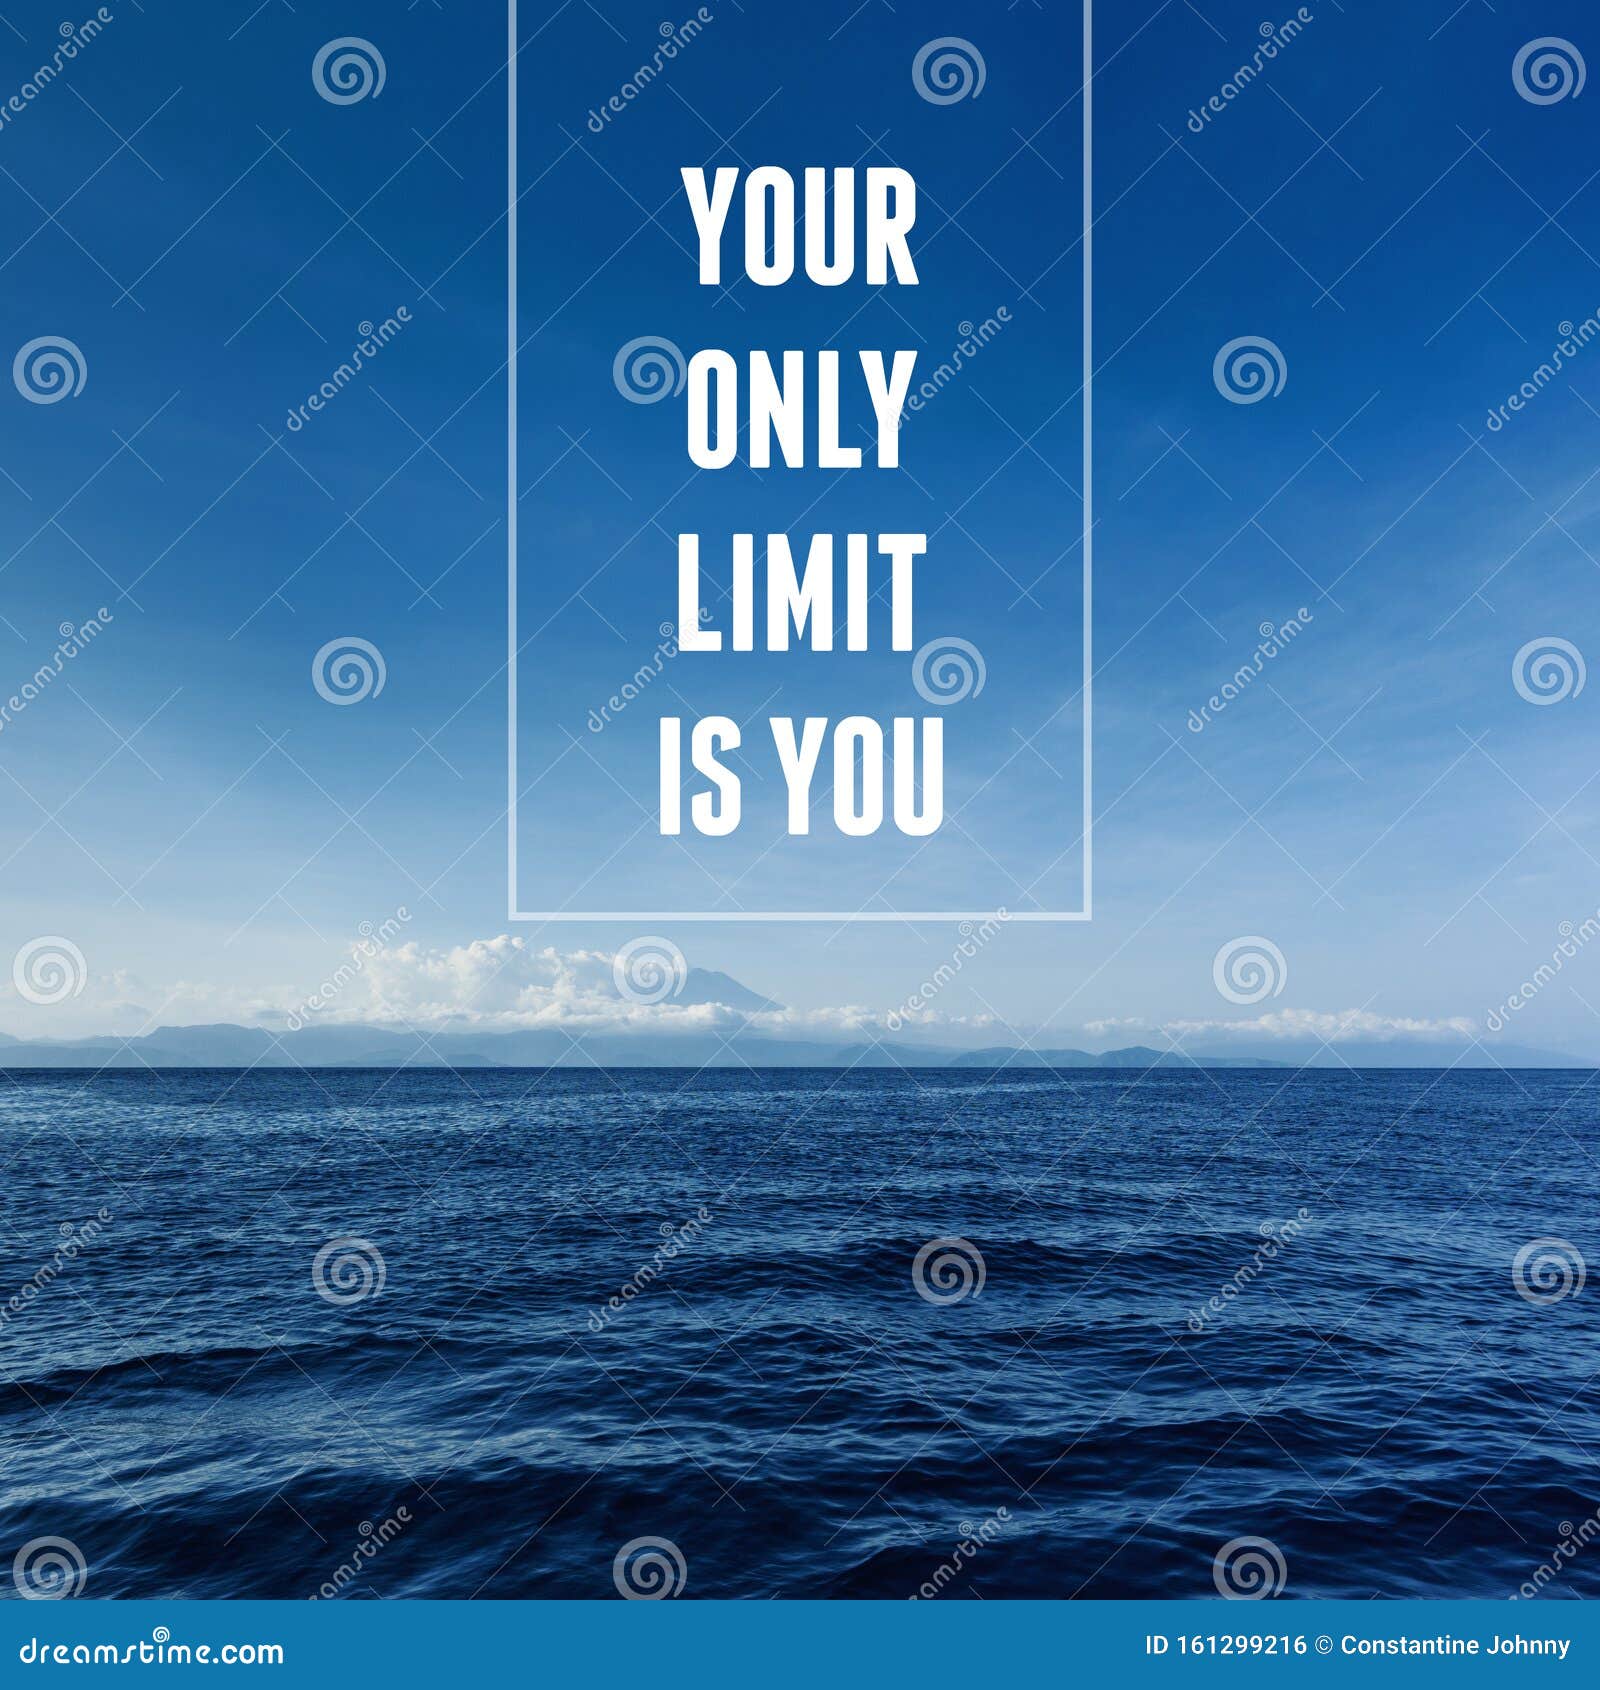 inspirational and motivational quote. your only limit is you